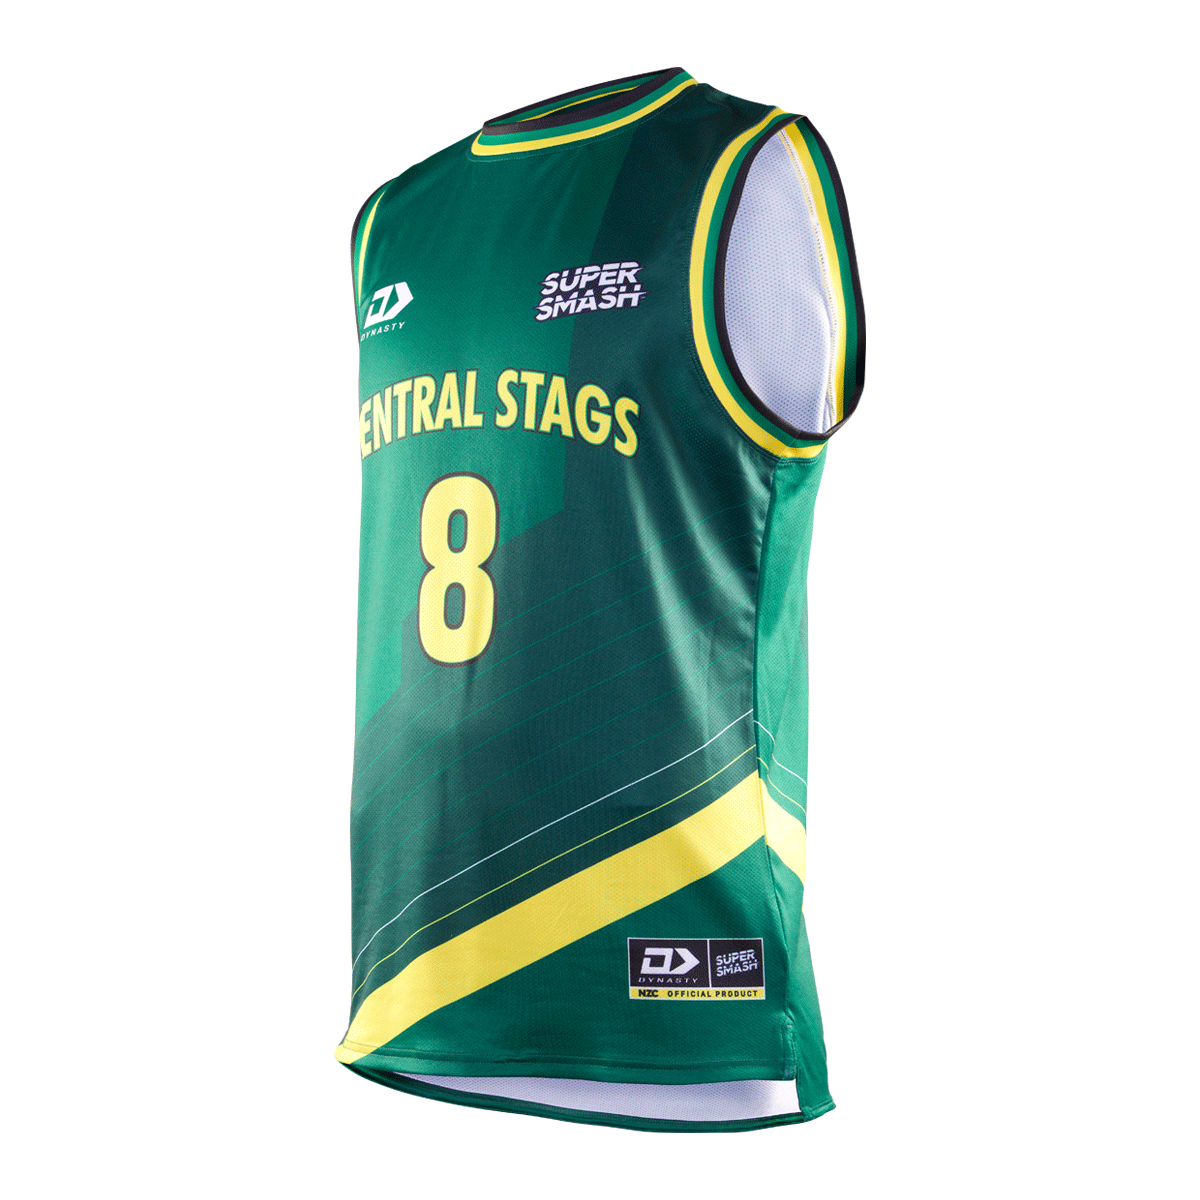 Central Stags Basketball Singlet